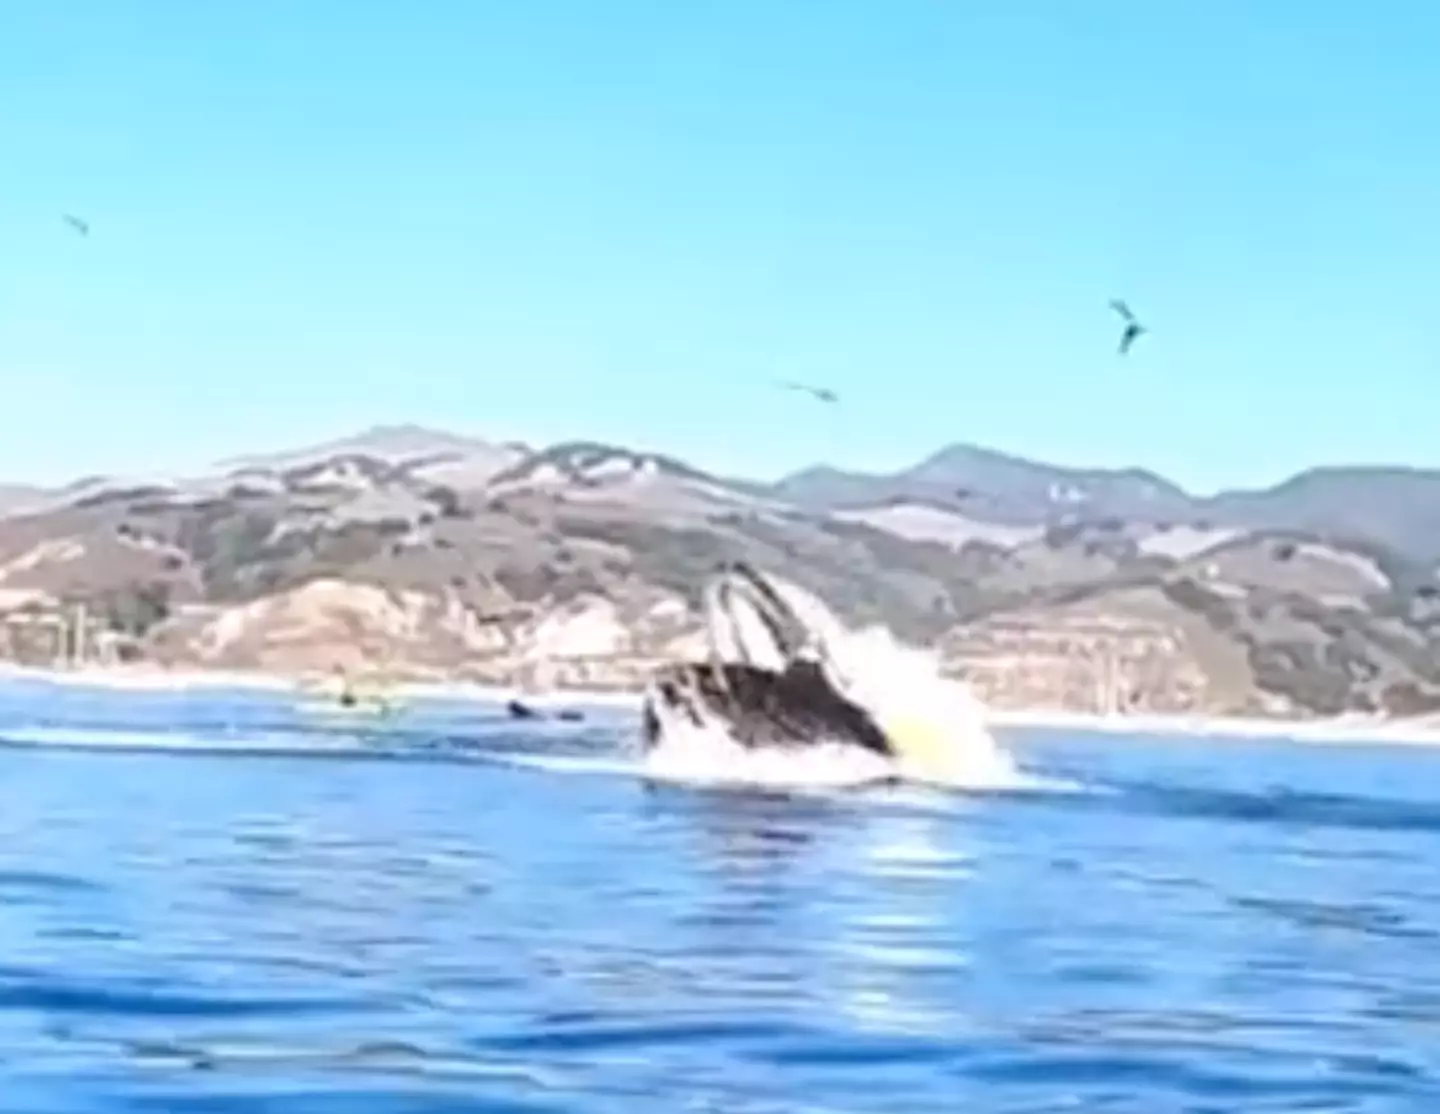 The whale engulfs both kayakers.